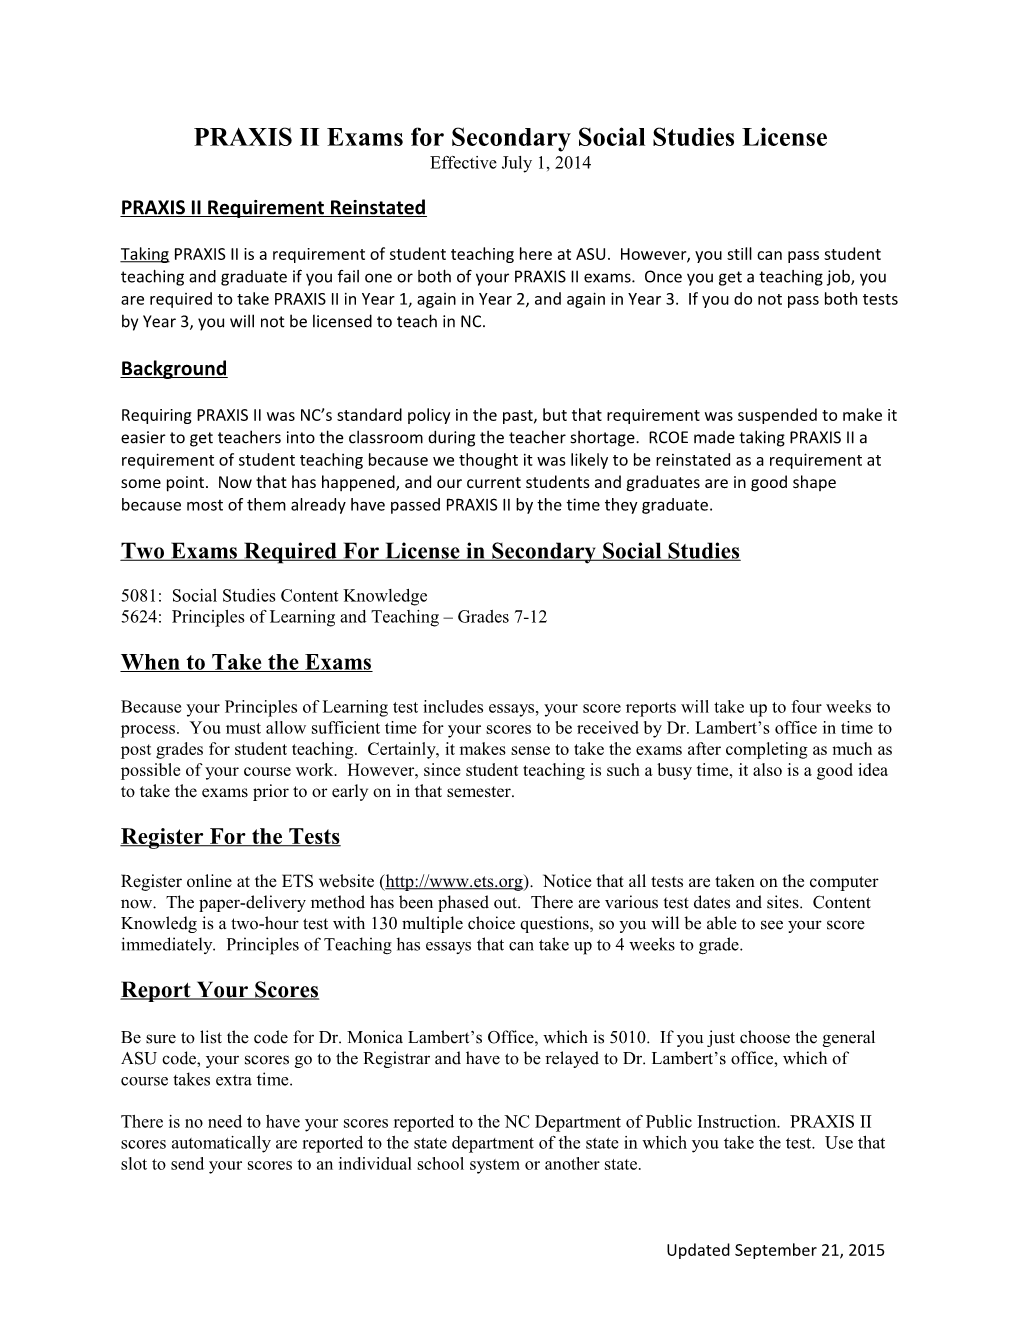 PRAXIS II Exams for Secondary Social Studies License